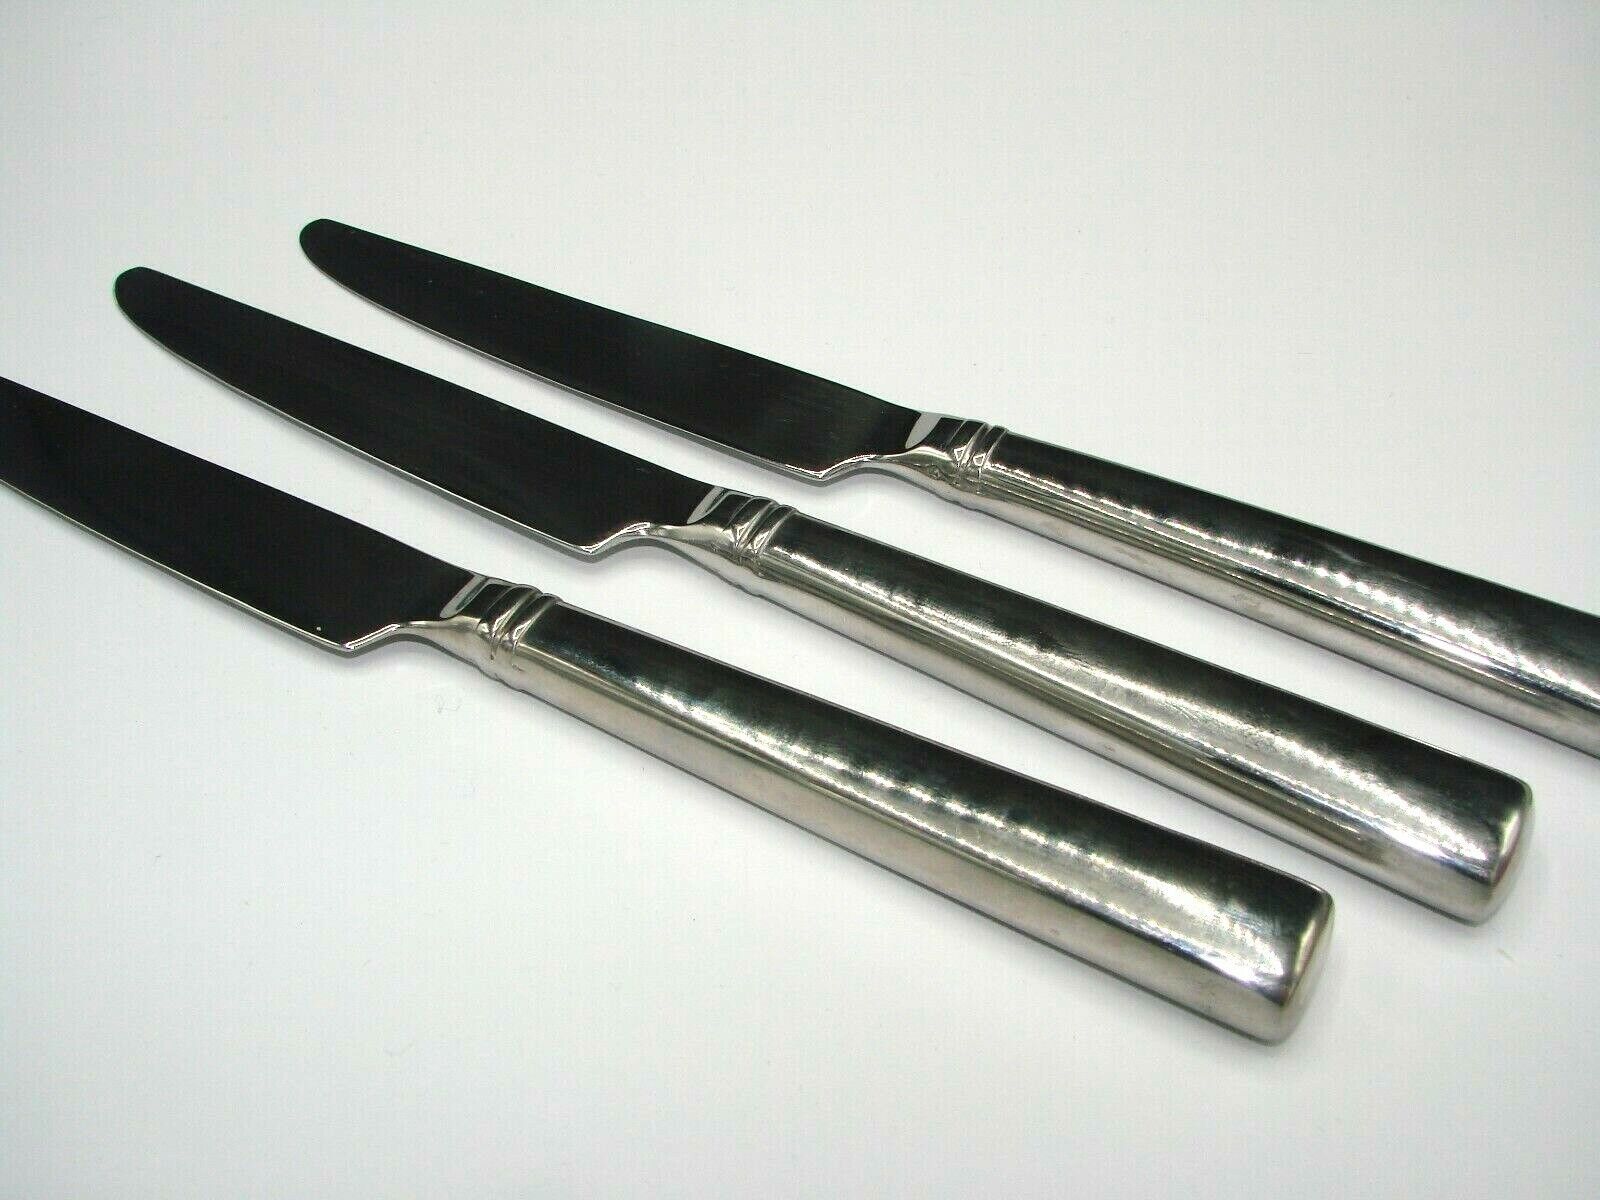 Primary image for REED BARTON HERITAGE MINT REGENT STAINLESS FLATWARE 18/10 3 9.5" Butter knives 